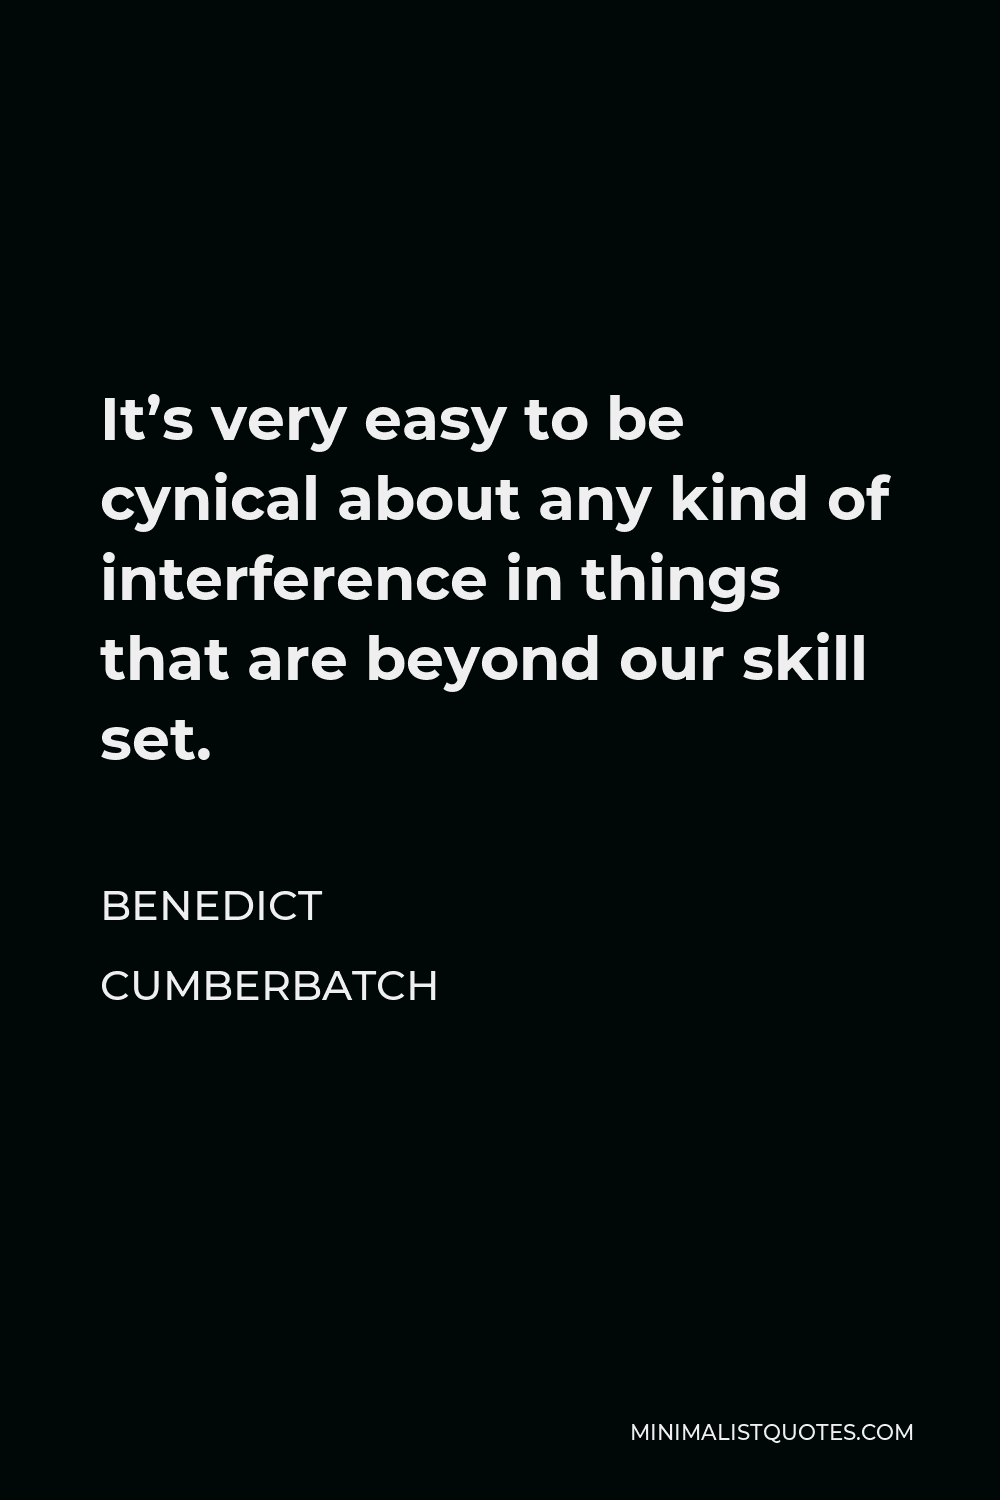 Benedict Cumberbatch Quote - It’s very easy to be cynical about any kind of interference in things that are beyond our skill set.